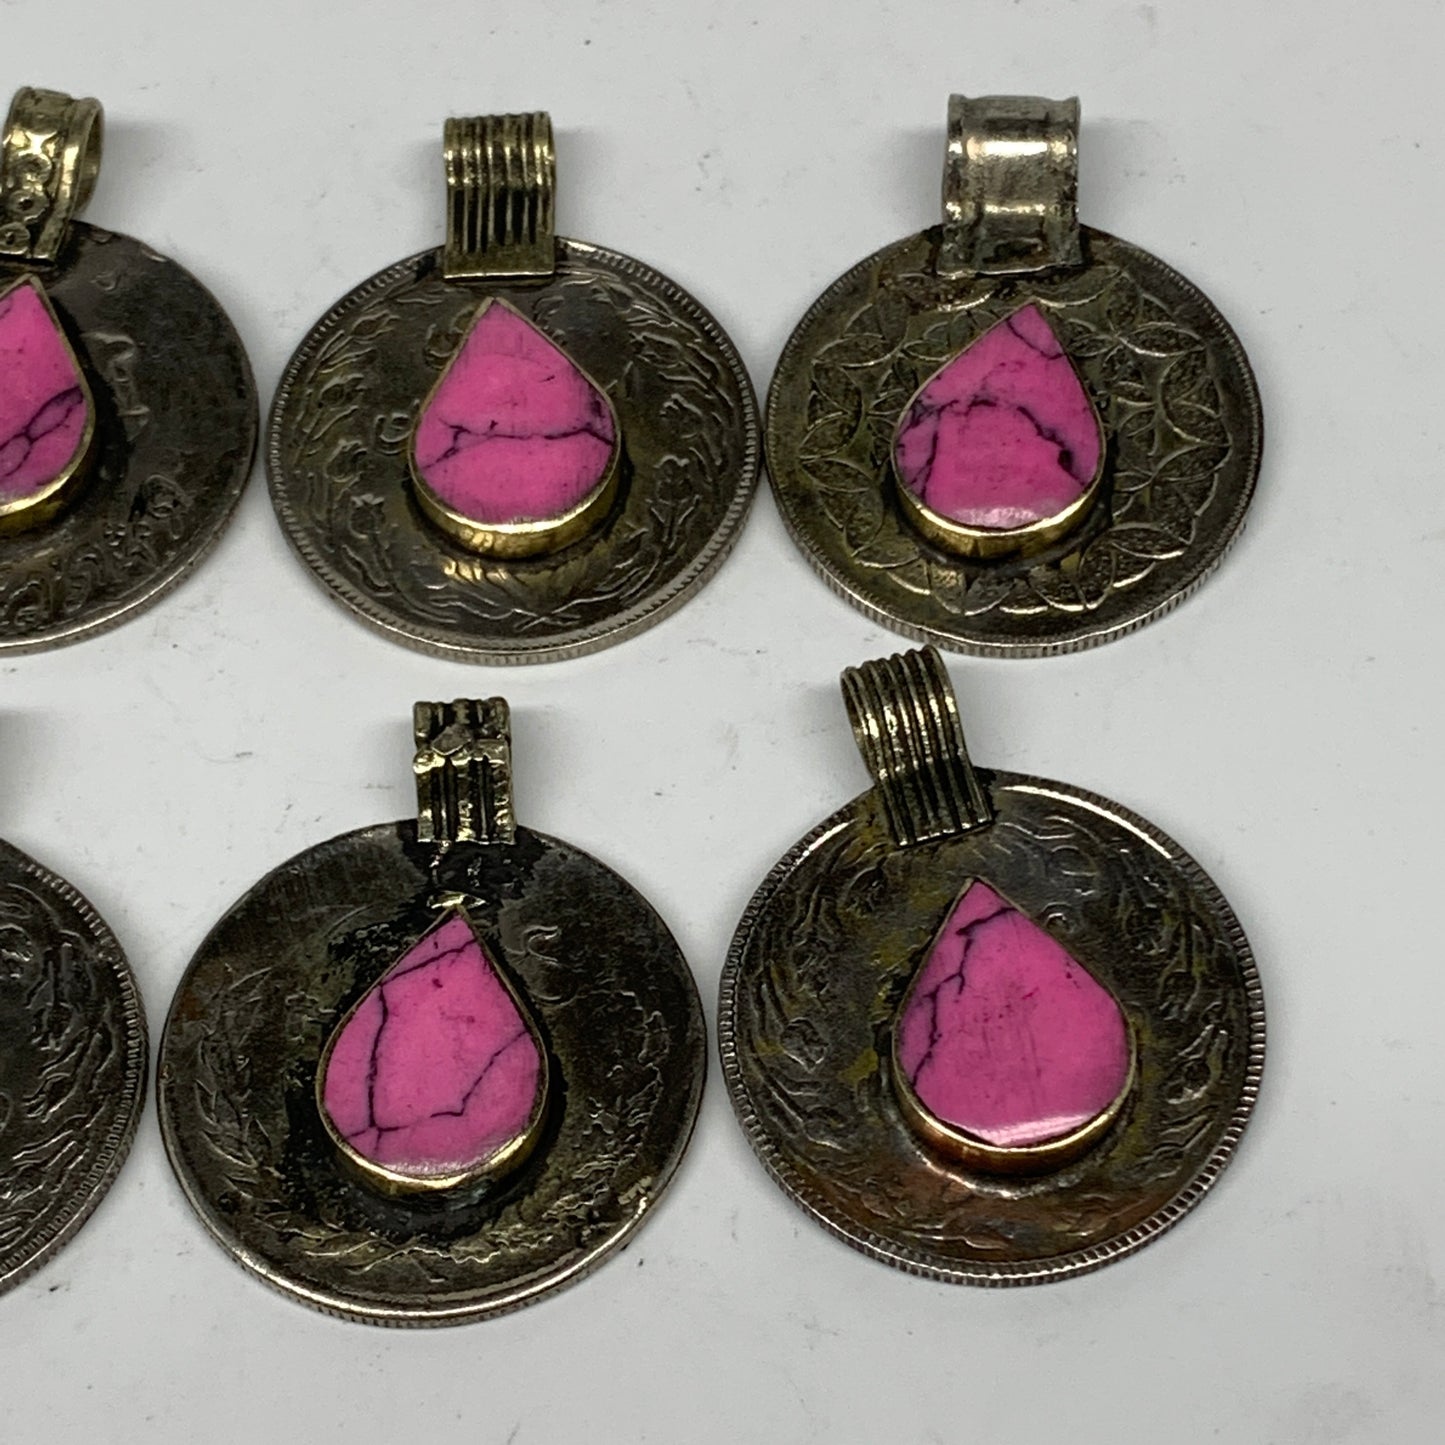 87g, 8pcs, Turkmen Coins Jeweled Synthetic Pink Tribal @Afghanistan, B14519